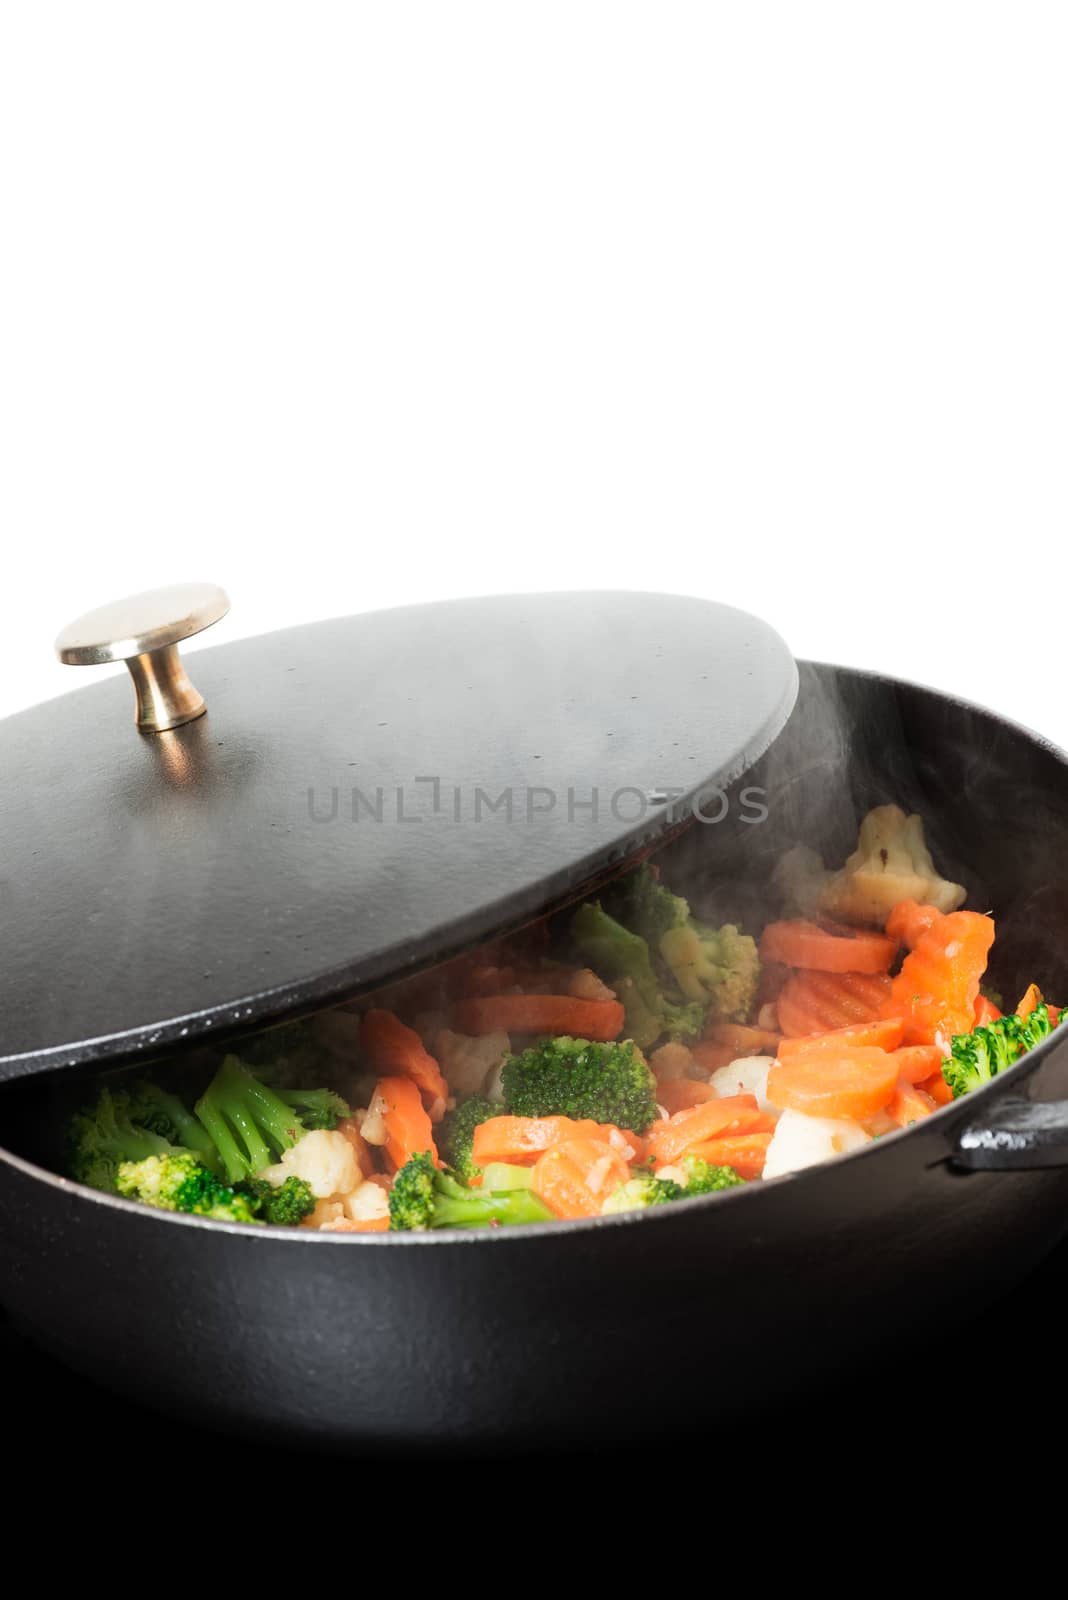 Frying vegies in skillet vertical copy space by Nanisimova